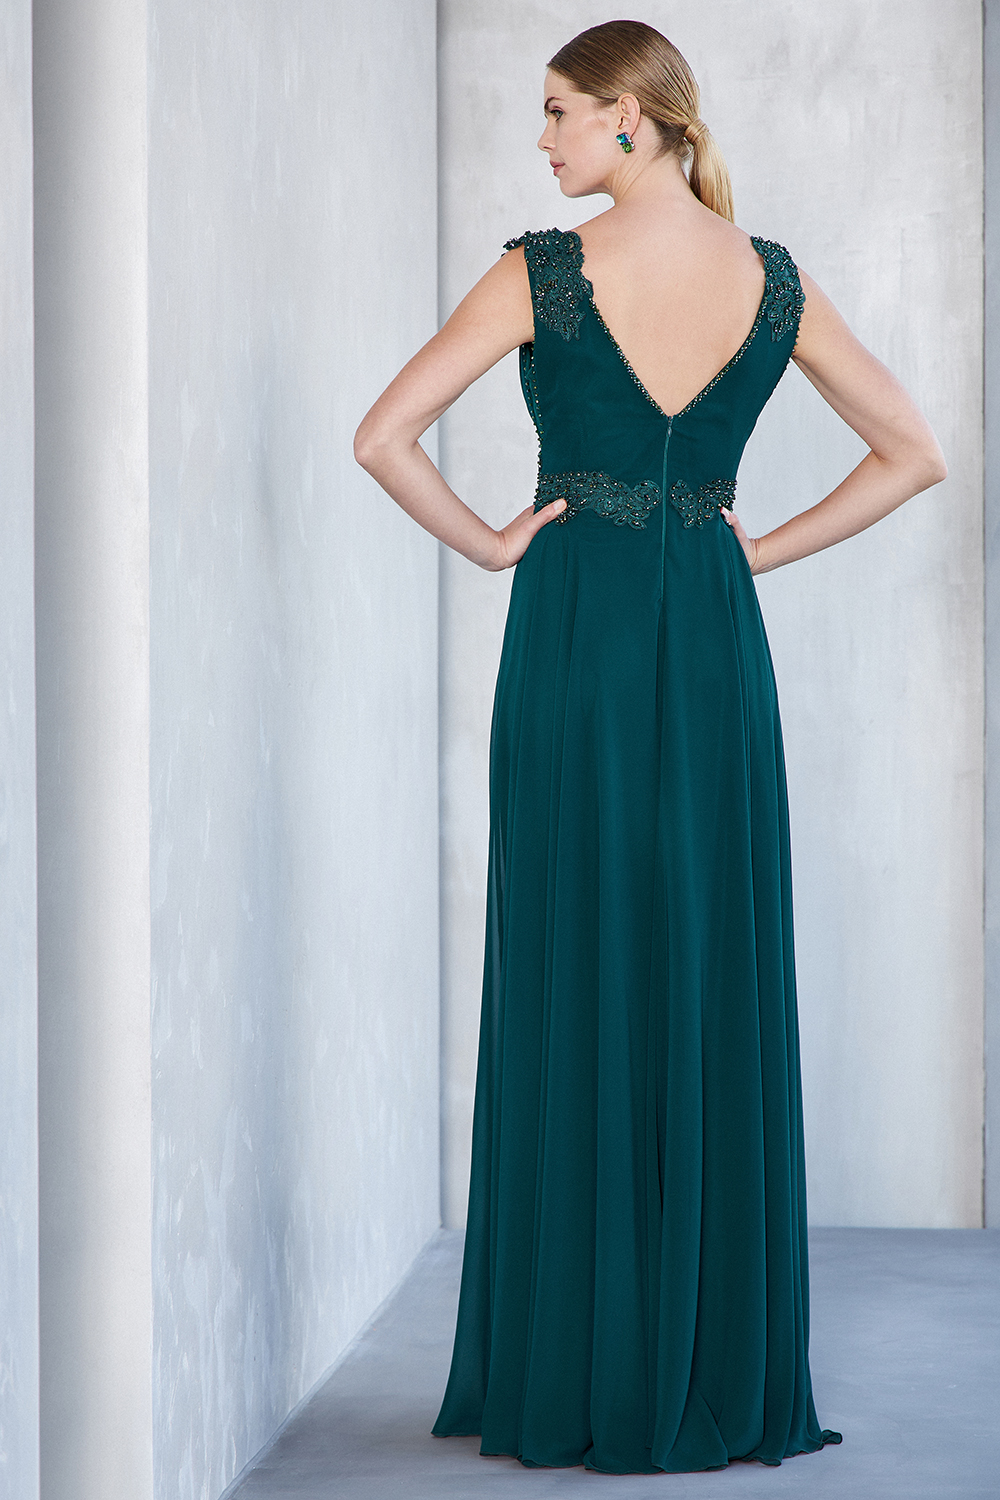 Classic Dresses / Long evening chiffon dress with beading and wide straps